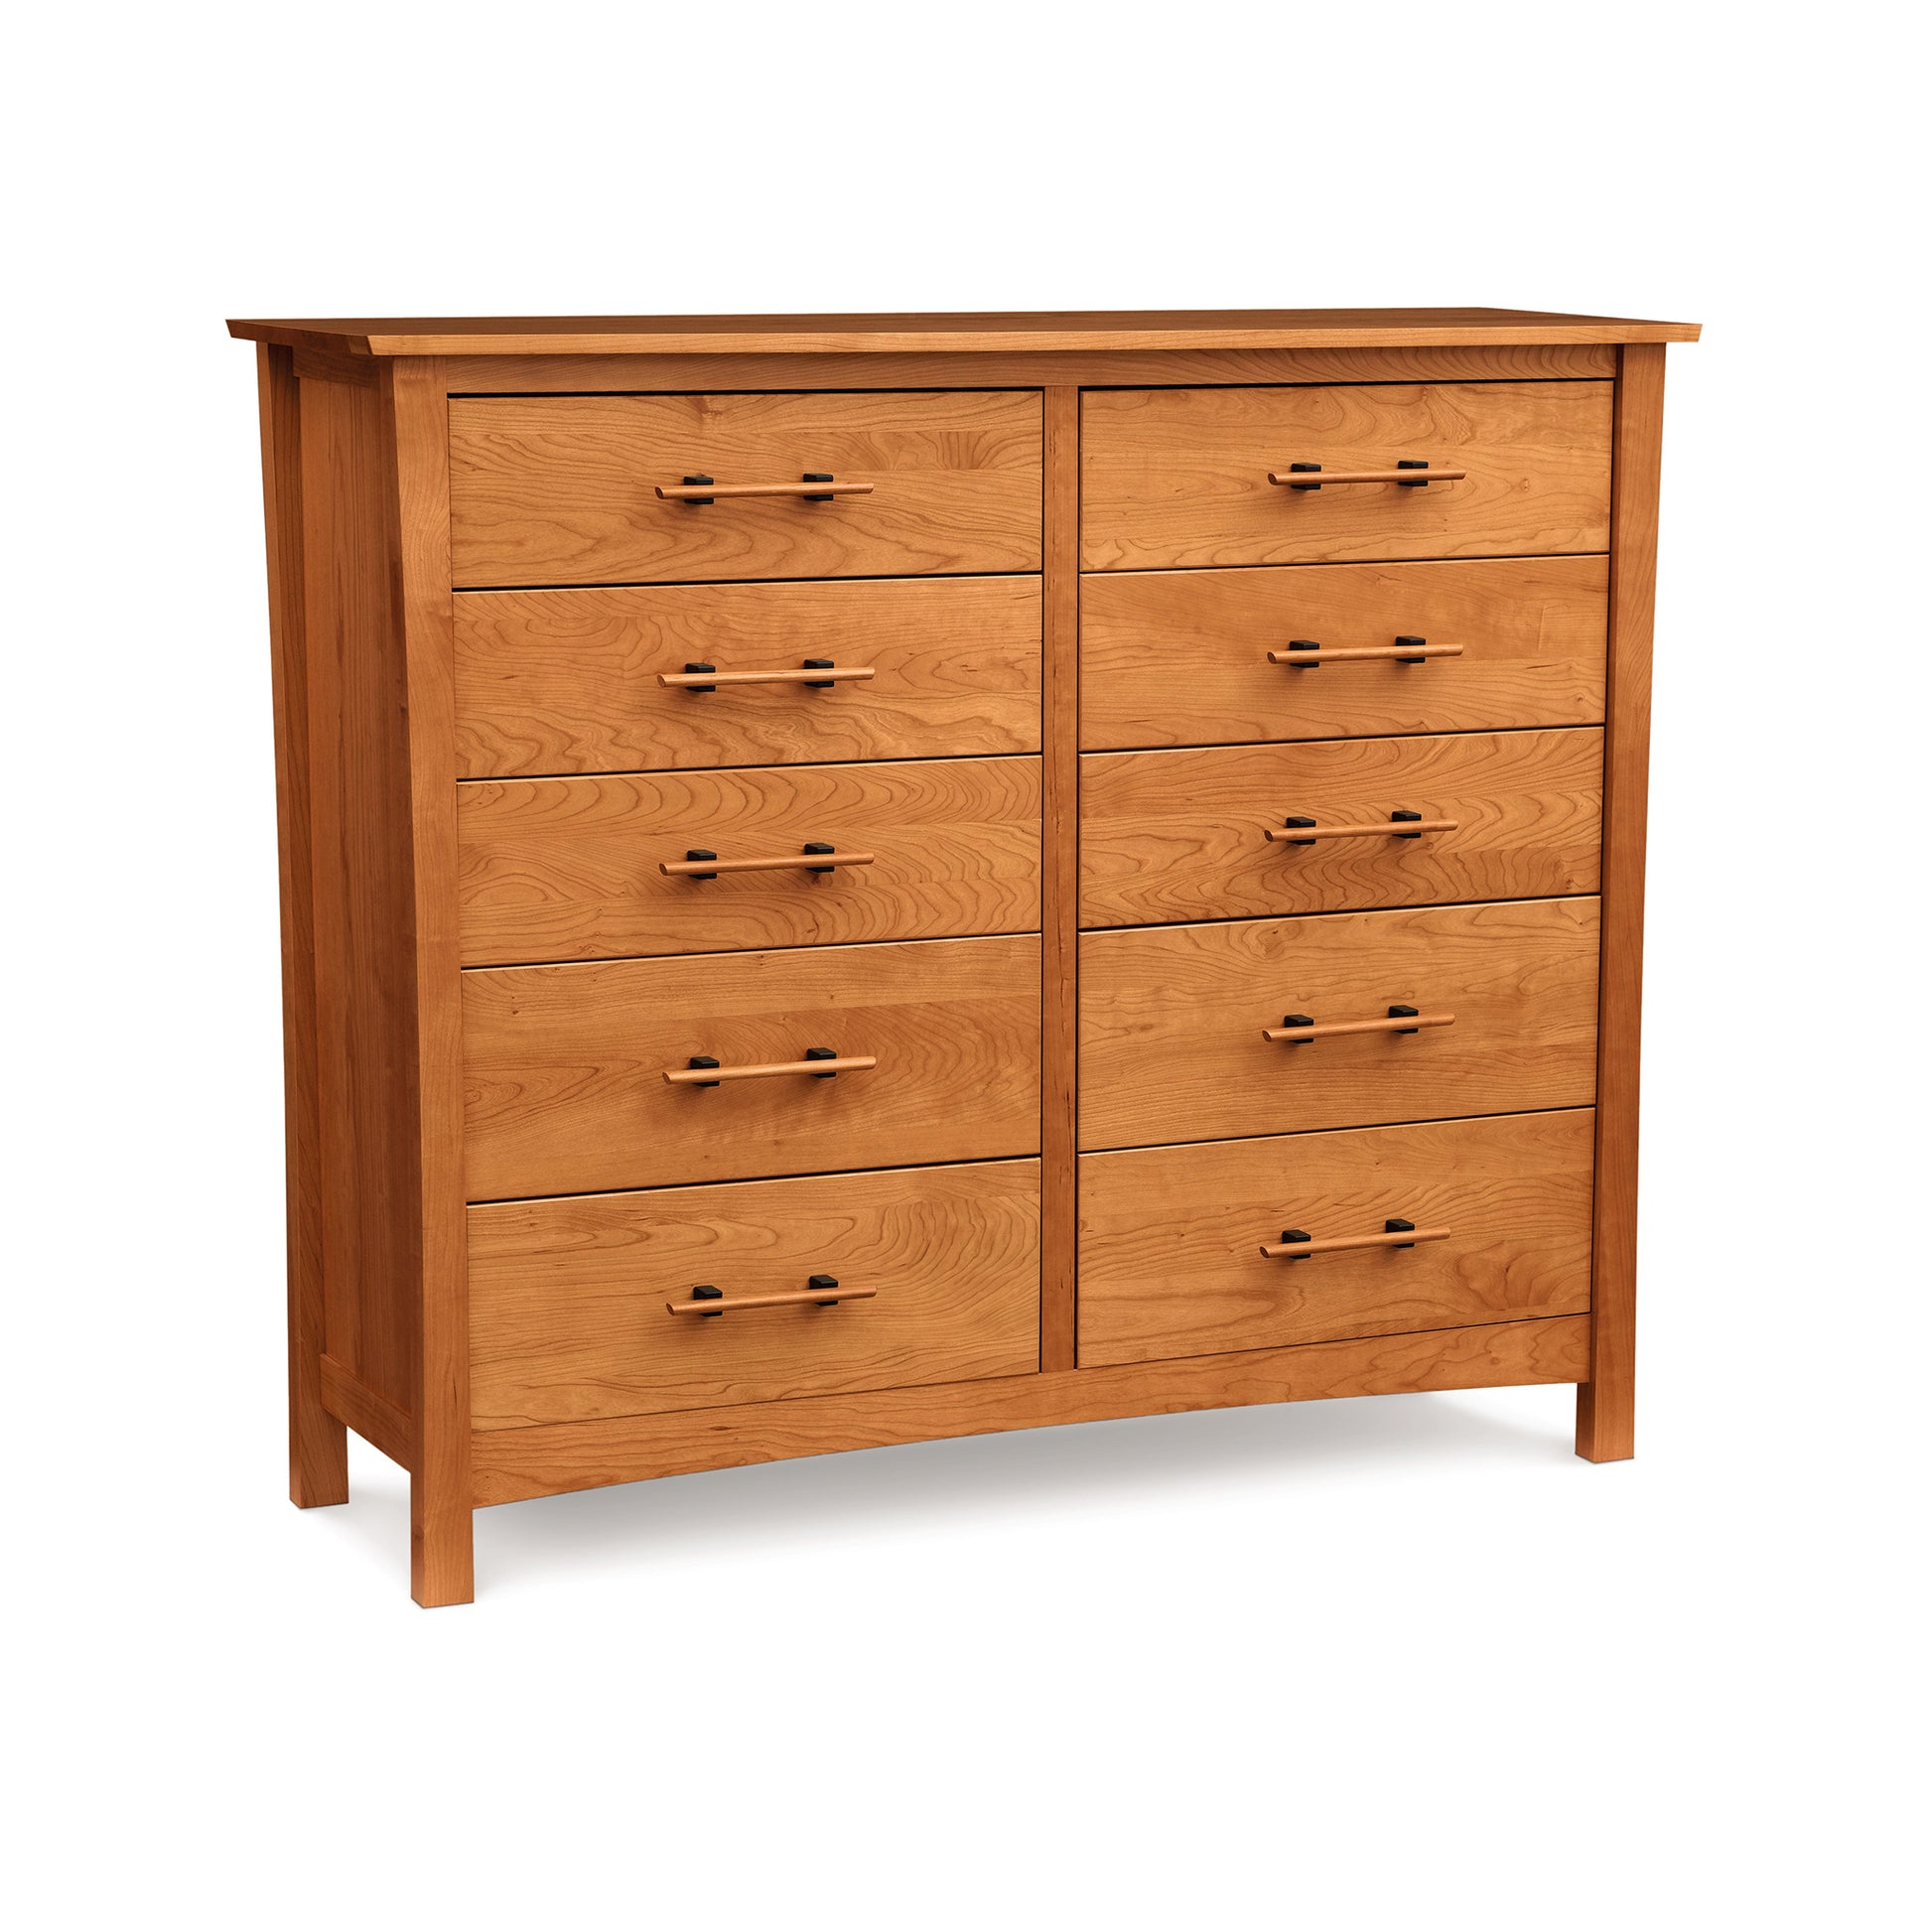 A Monterey 10-Drawer Dresser from Copeland Furniture with ten evenly sized, handle-equipped drawers, isolated against a white background.